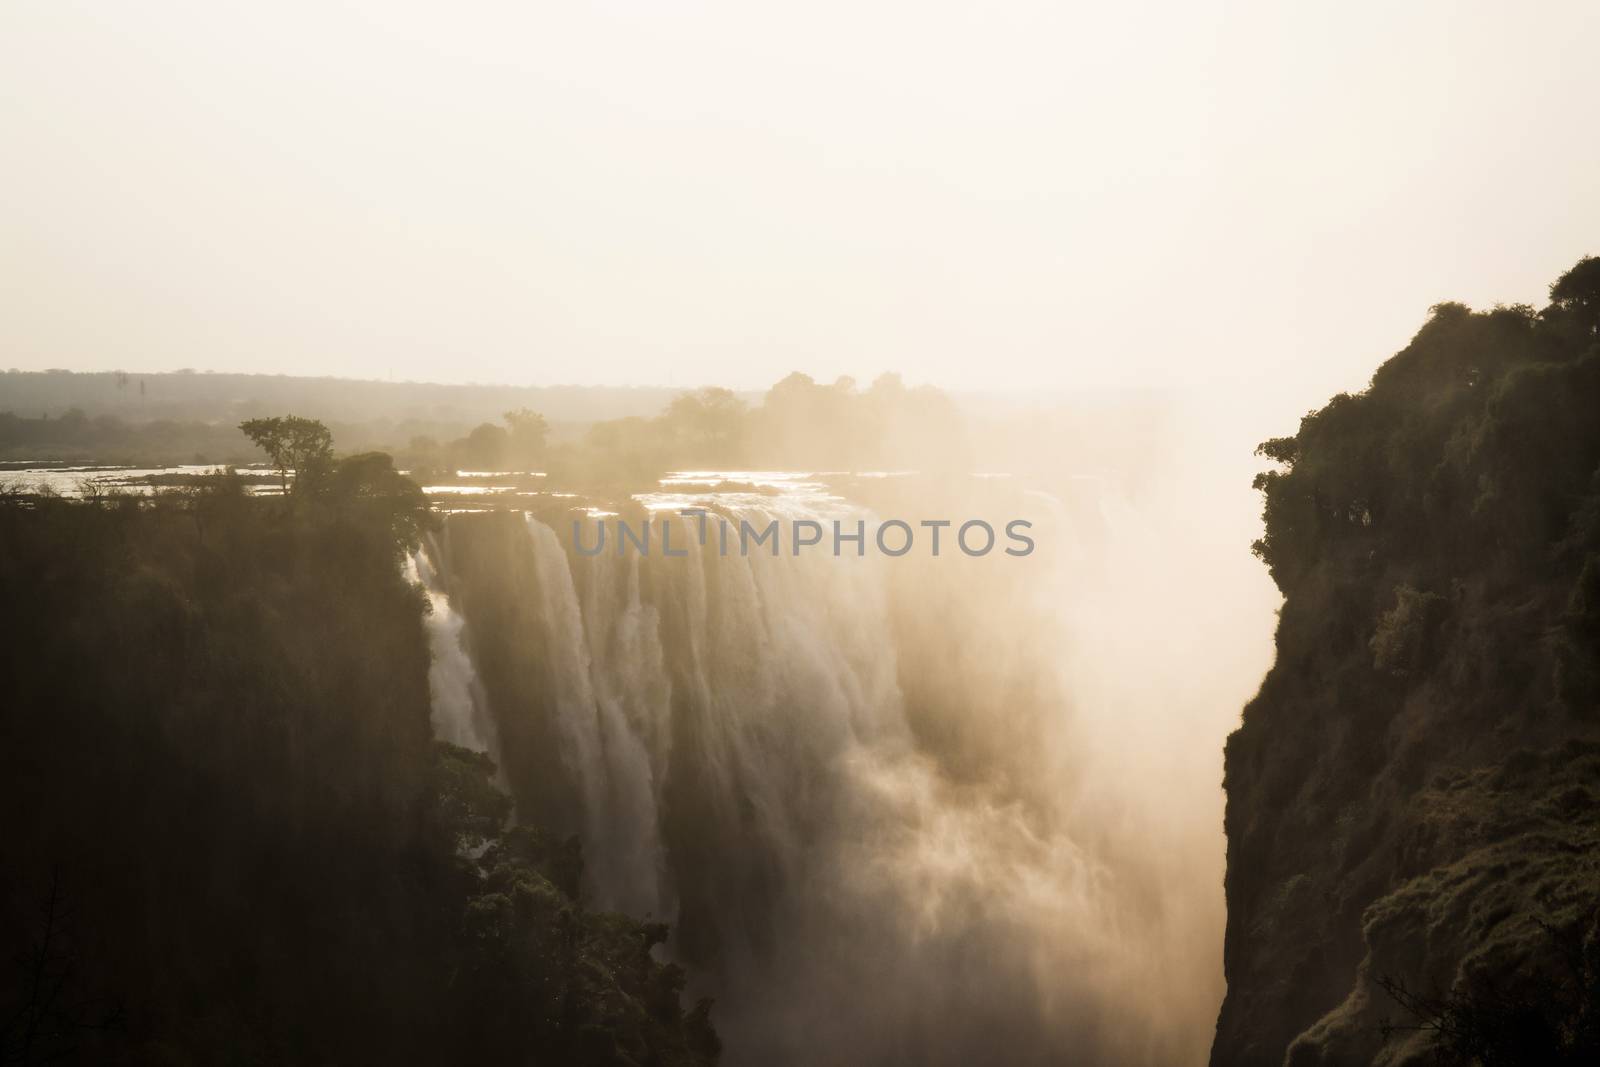 famous Victoria Falls on the Zambezi River in South Africa. At the end of the rainy season, the waterfall most high water